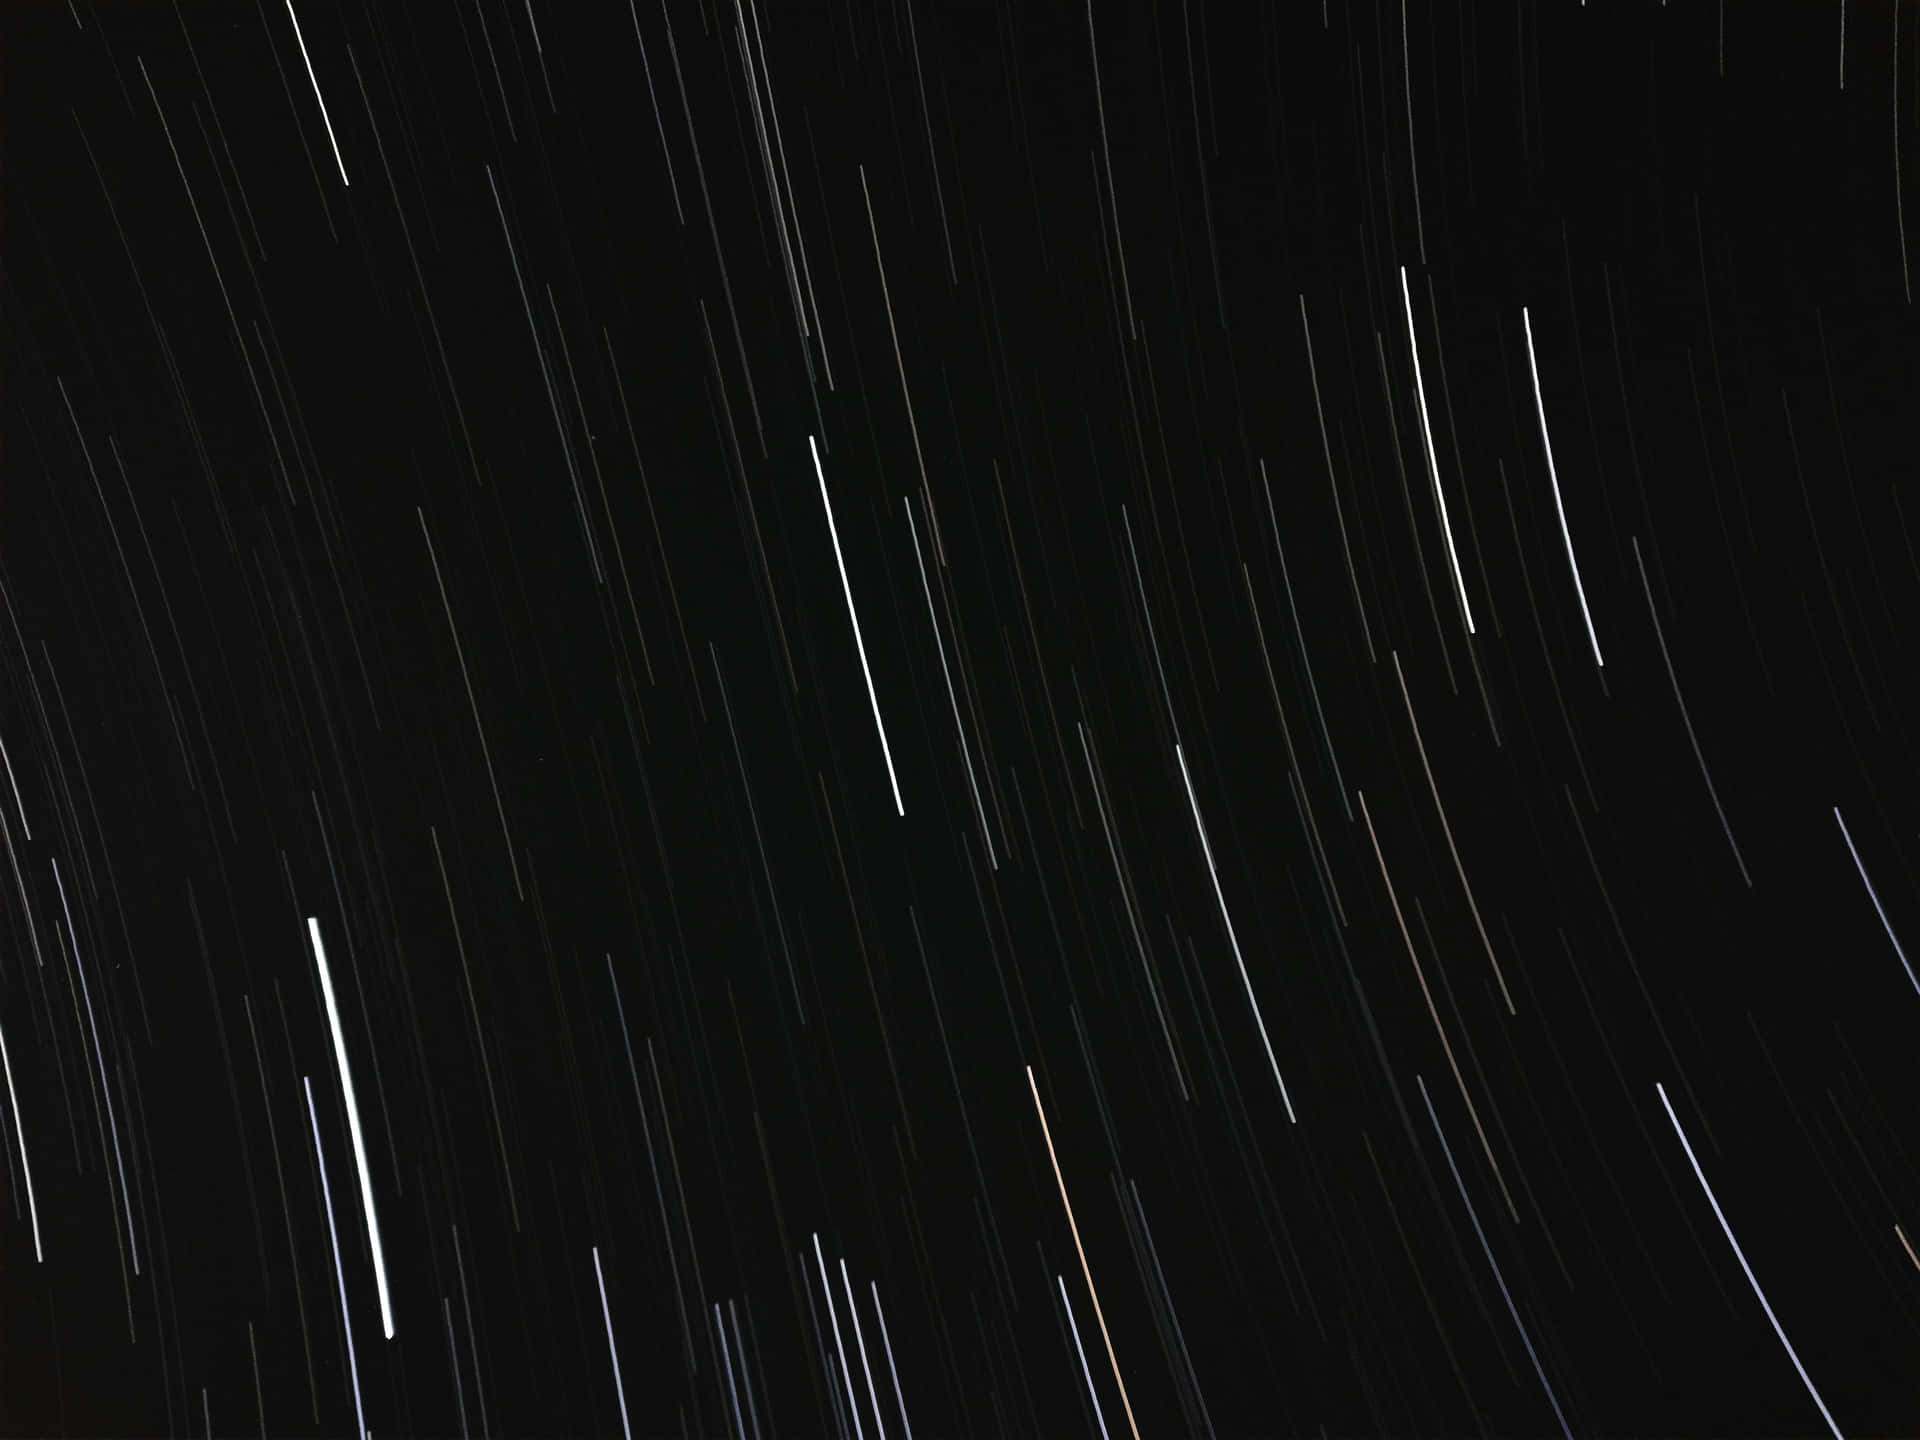 Star Trails In The Night Sky